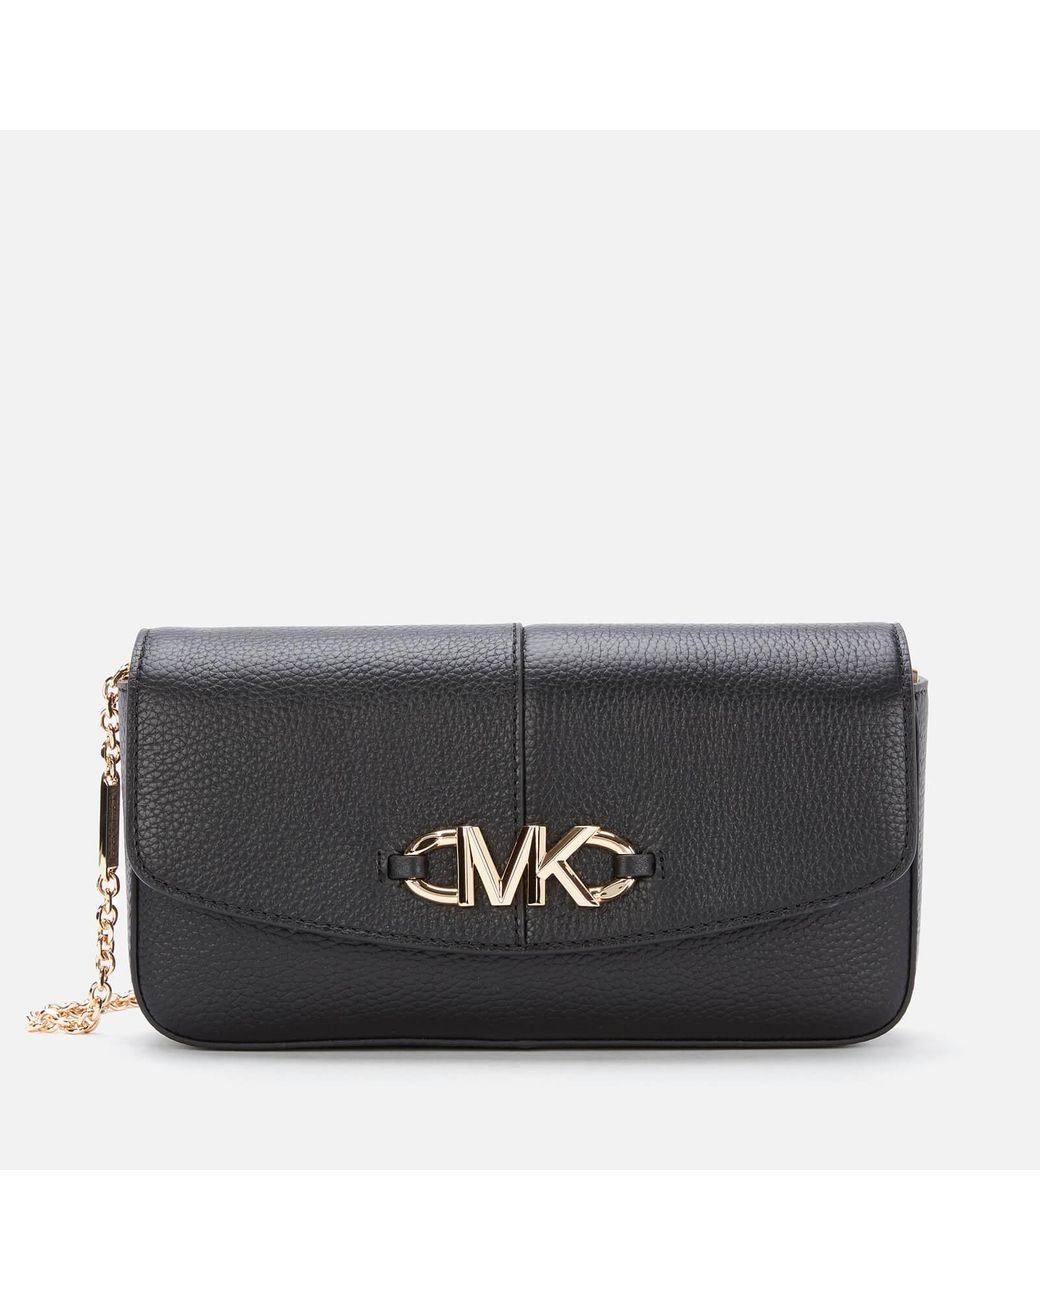 MICHAEL Michael Kors Leather Izzy Clutch Bag in Black | Lyst